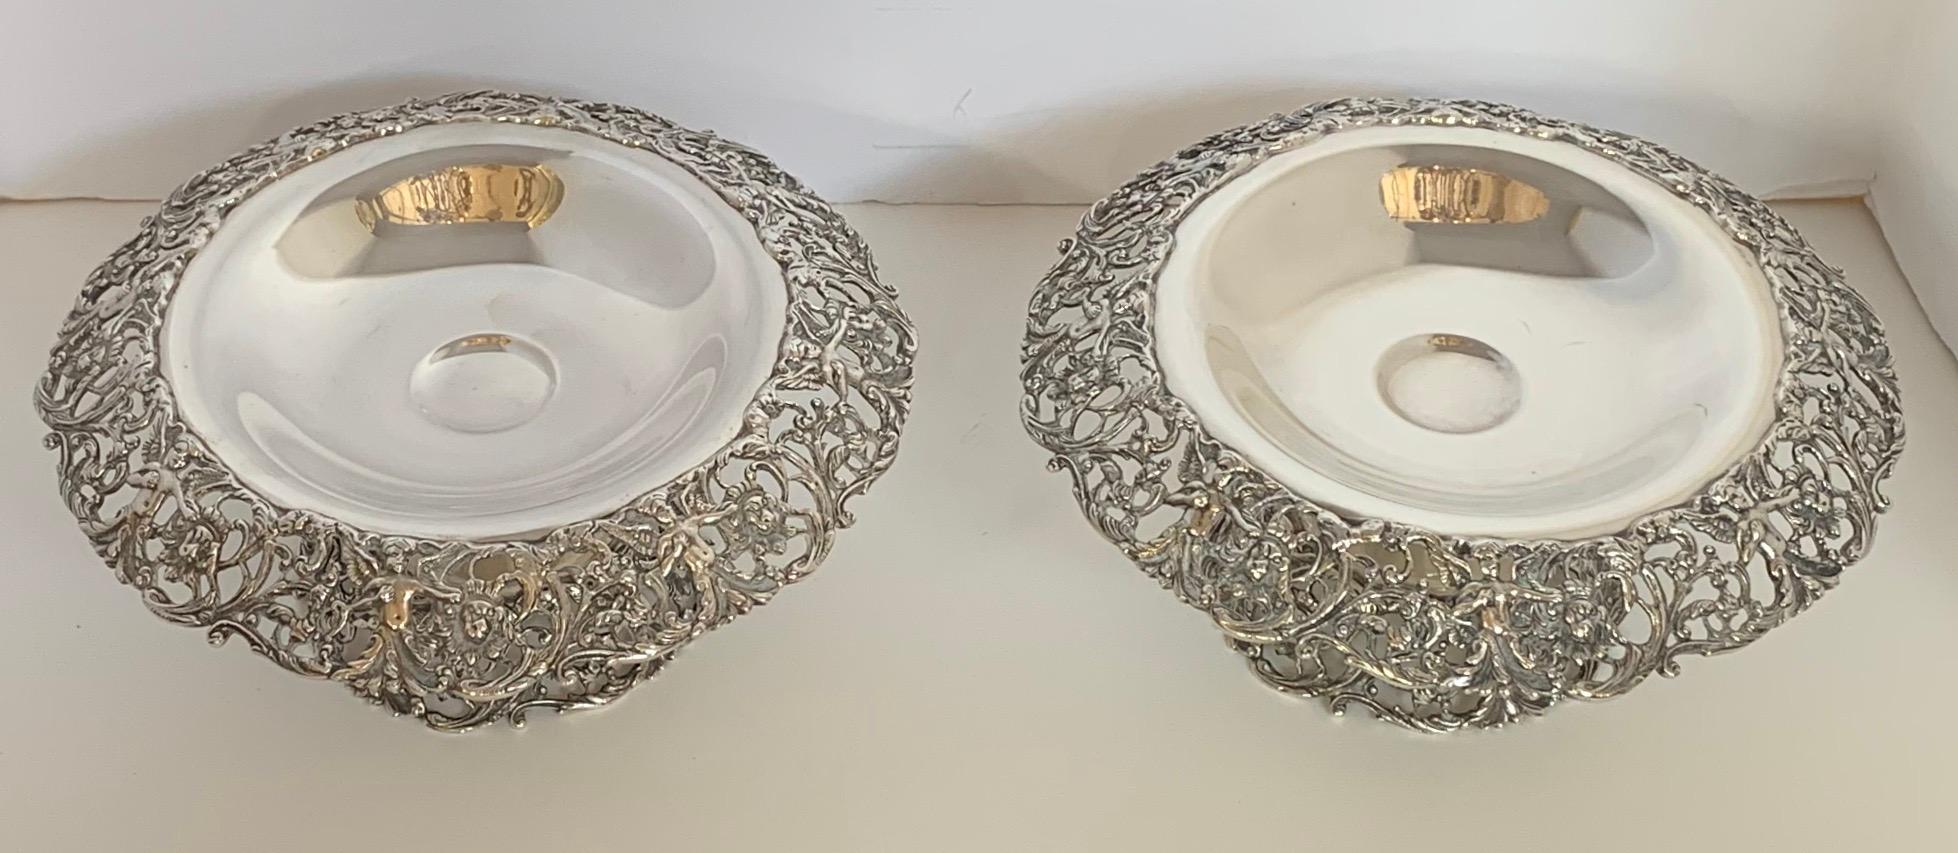 A wonderful pair of American sterling silver reticulated compotes by Durham Silver Co. featuring a pierced edge and foot with a winged cherub and lion design. These ornate compotes feature an everted top section with pierced cherub and lion masques